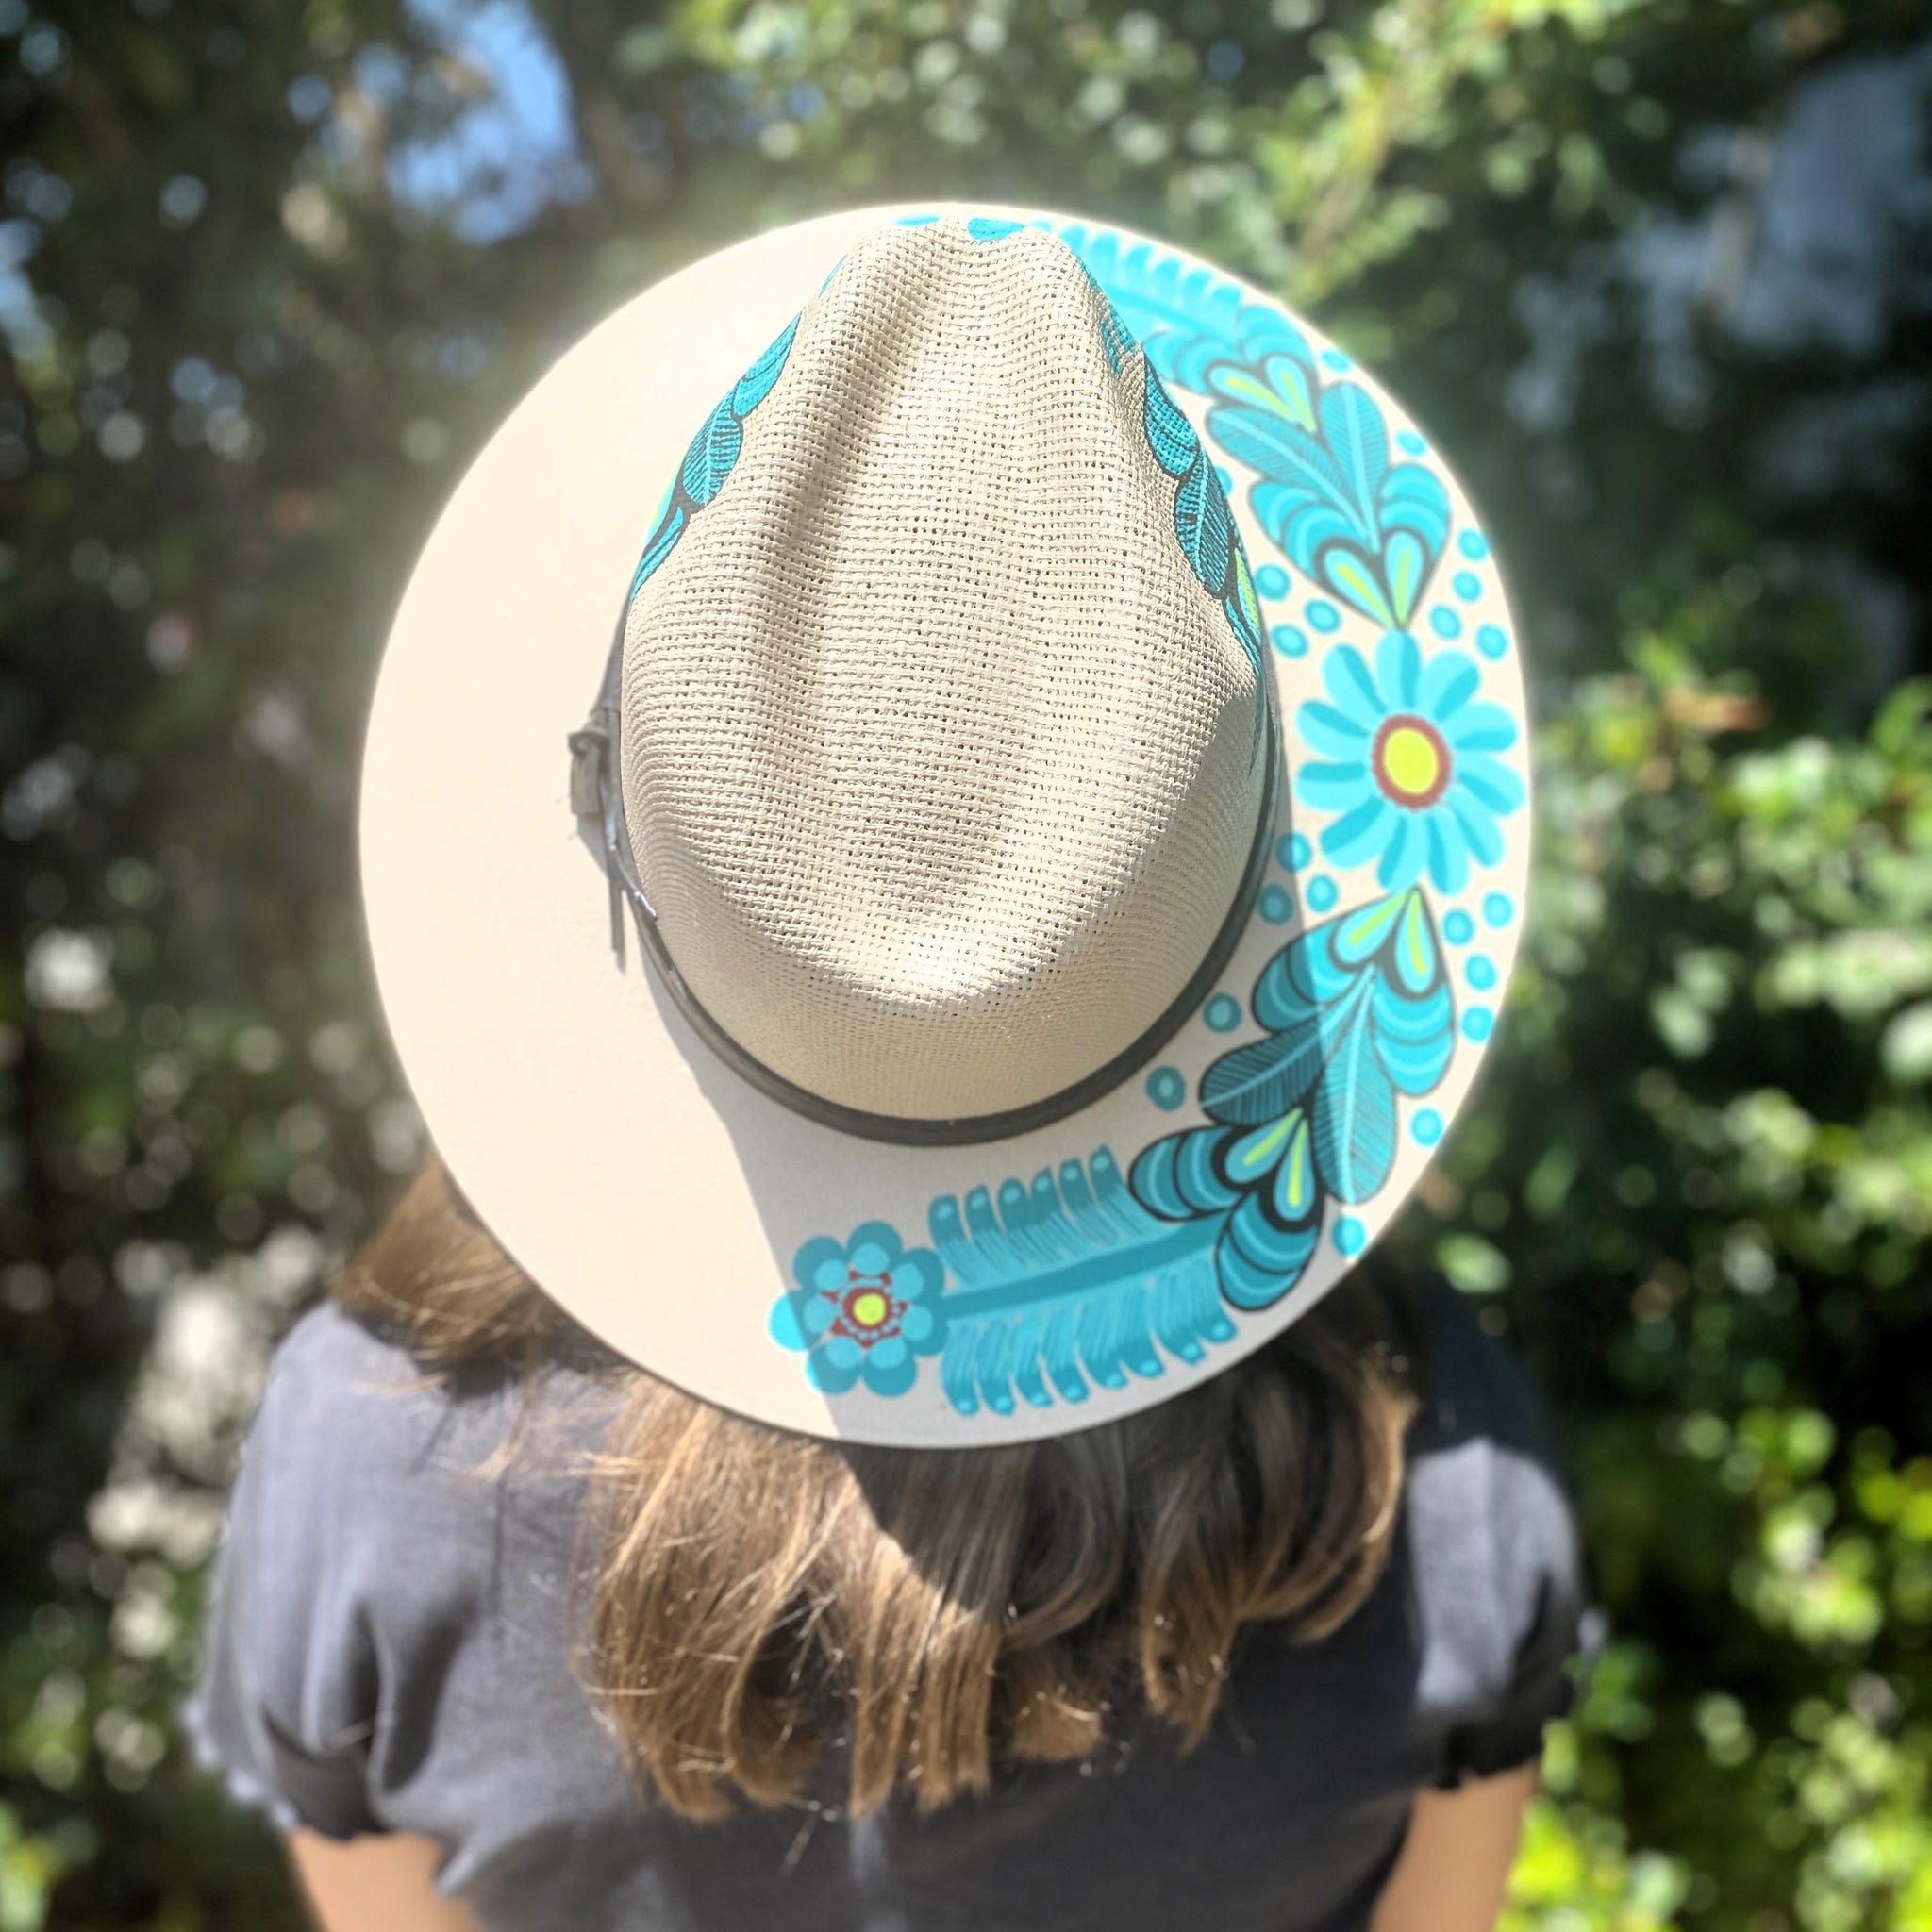 Mexican Artisanal Hat Hand Painted Floral Fedora Style - Turquoise Natural Palm Theme